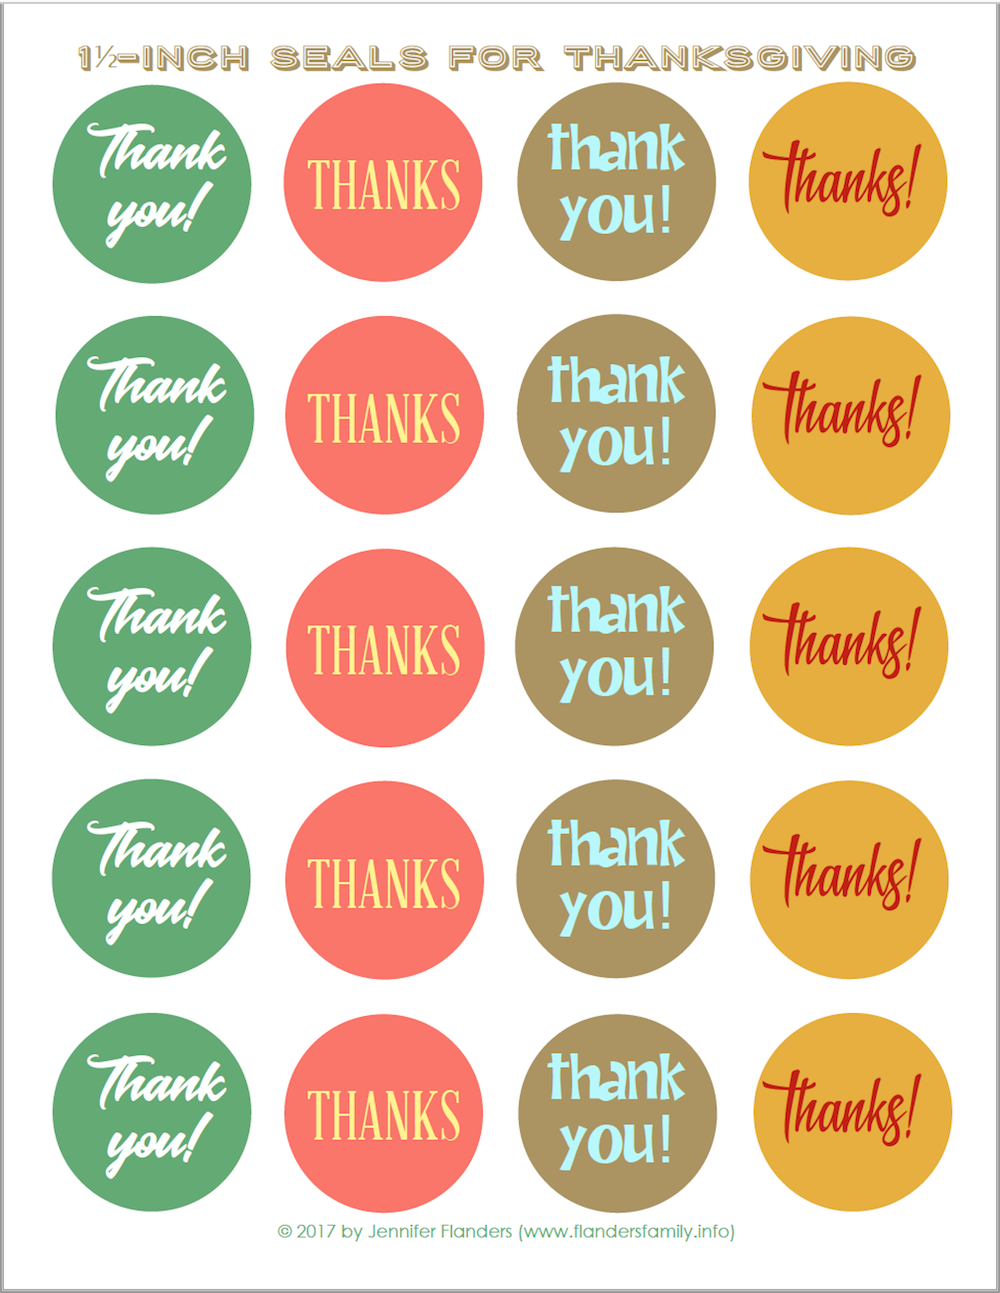 Free Printable Stickers/ Envelope Seals for Thanksgiving